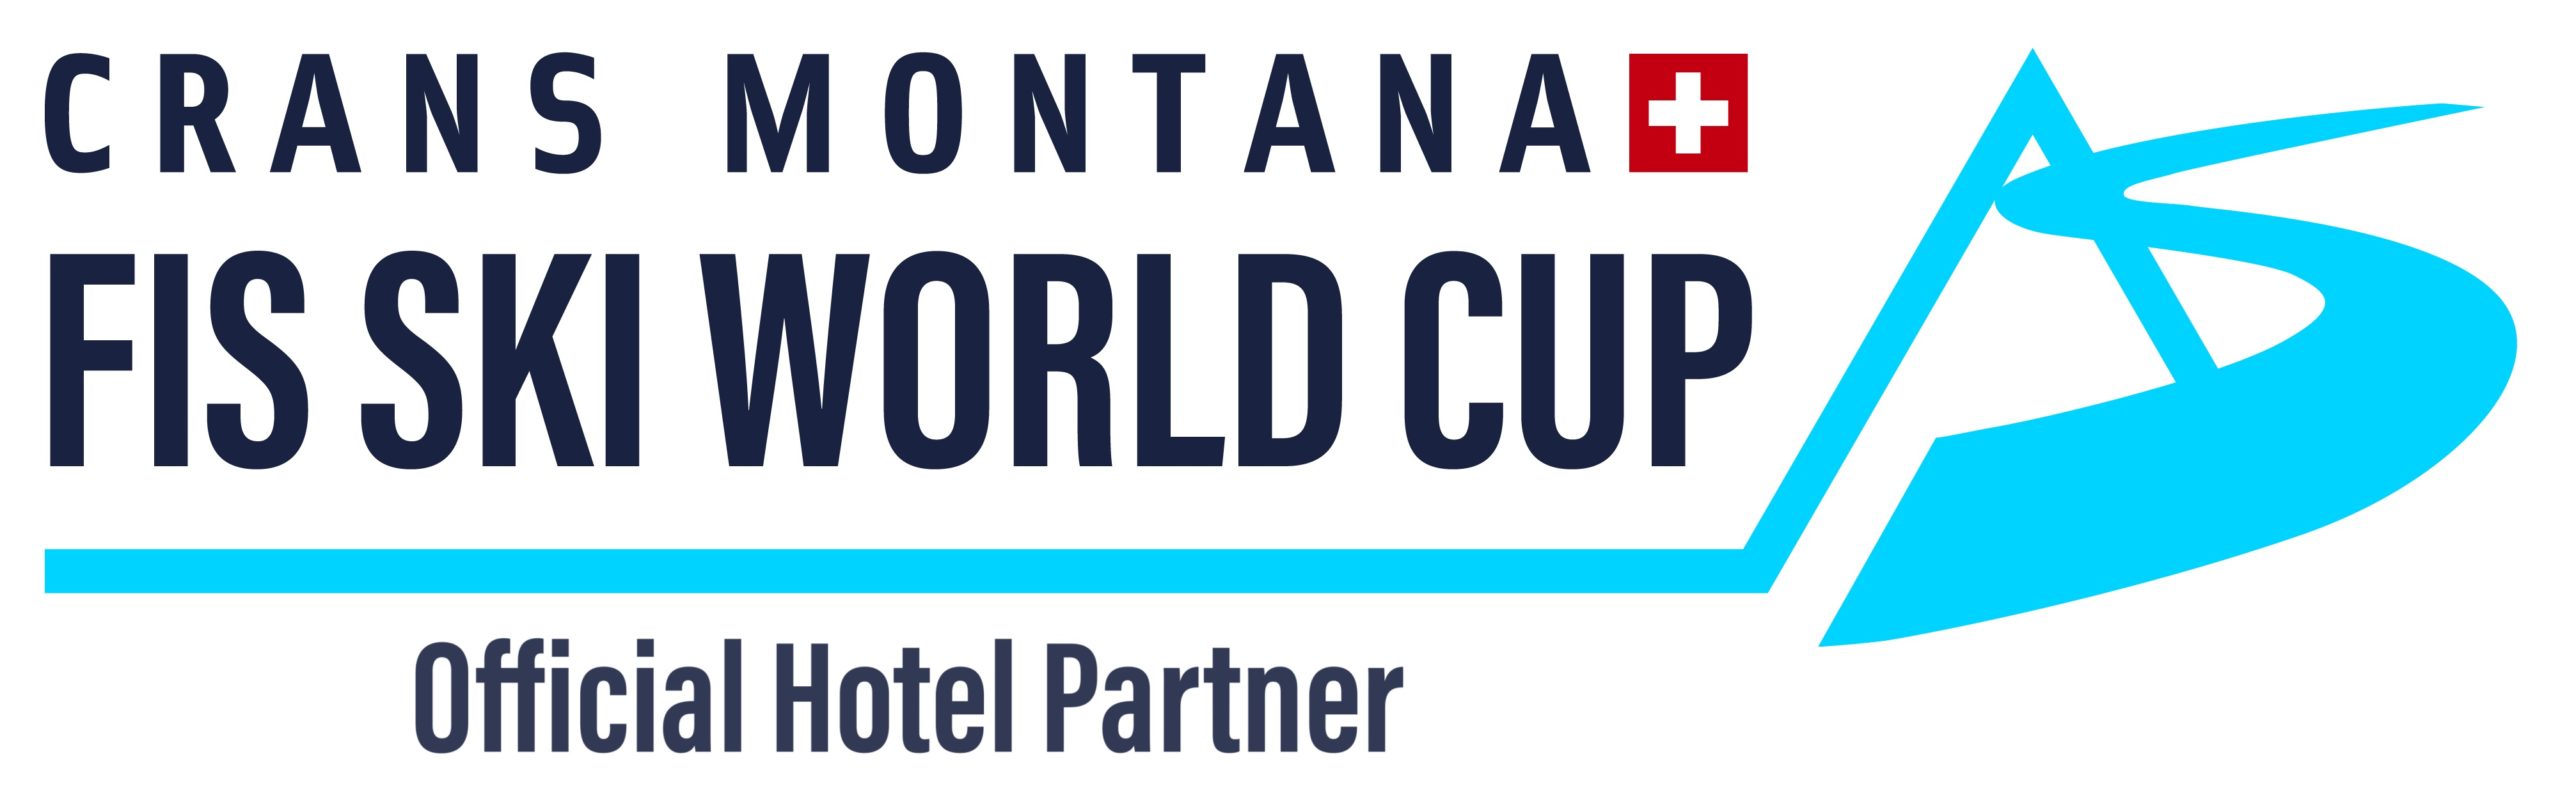 Crans Montana FIS World Cup, Official Hotel Partner